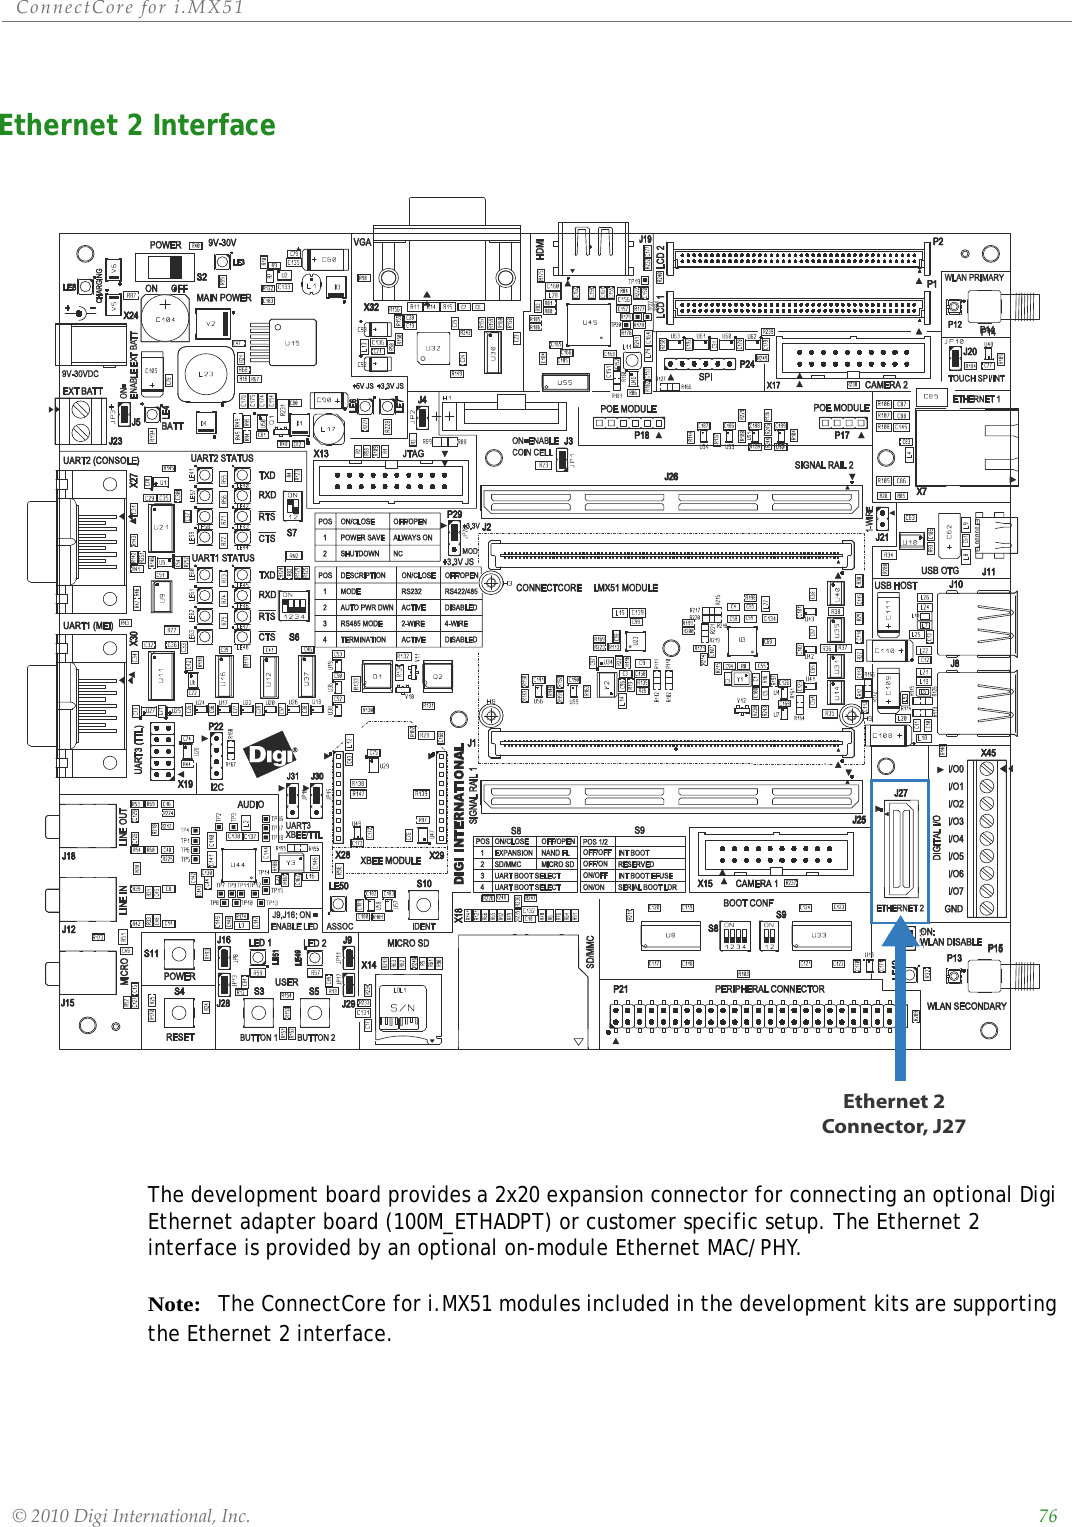 ConnectCorefori.MX51©2010DigiInternational,Inc. 76Ethernet 2 Interface The development board provides a 2x20 expansion connector for connecting an optional Digi Ethernet adapter board (100M_ETHADPT) or customer specific setup. The Ethernet 2 interface is provided by an optional on-module Ethernet MAC/PHY. Note:   The ConnectCore for i.MX51 modules included in the development kits are supporting the Ethernet 2 interface.Ethernet 2Connector, J27